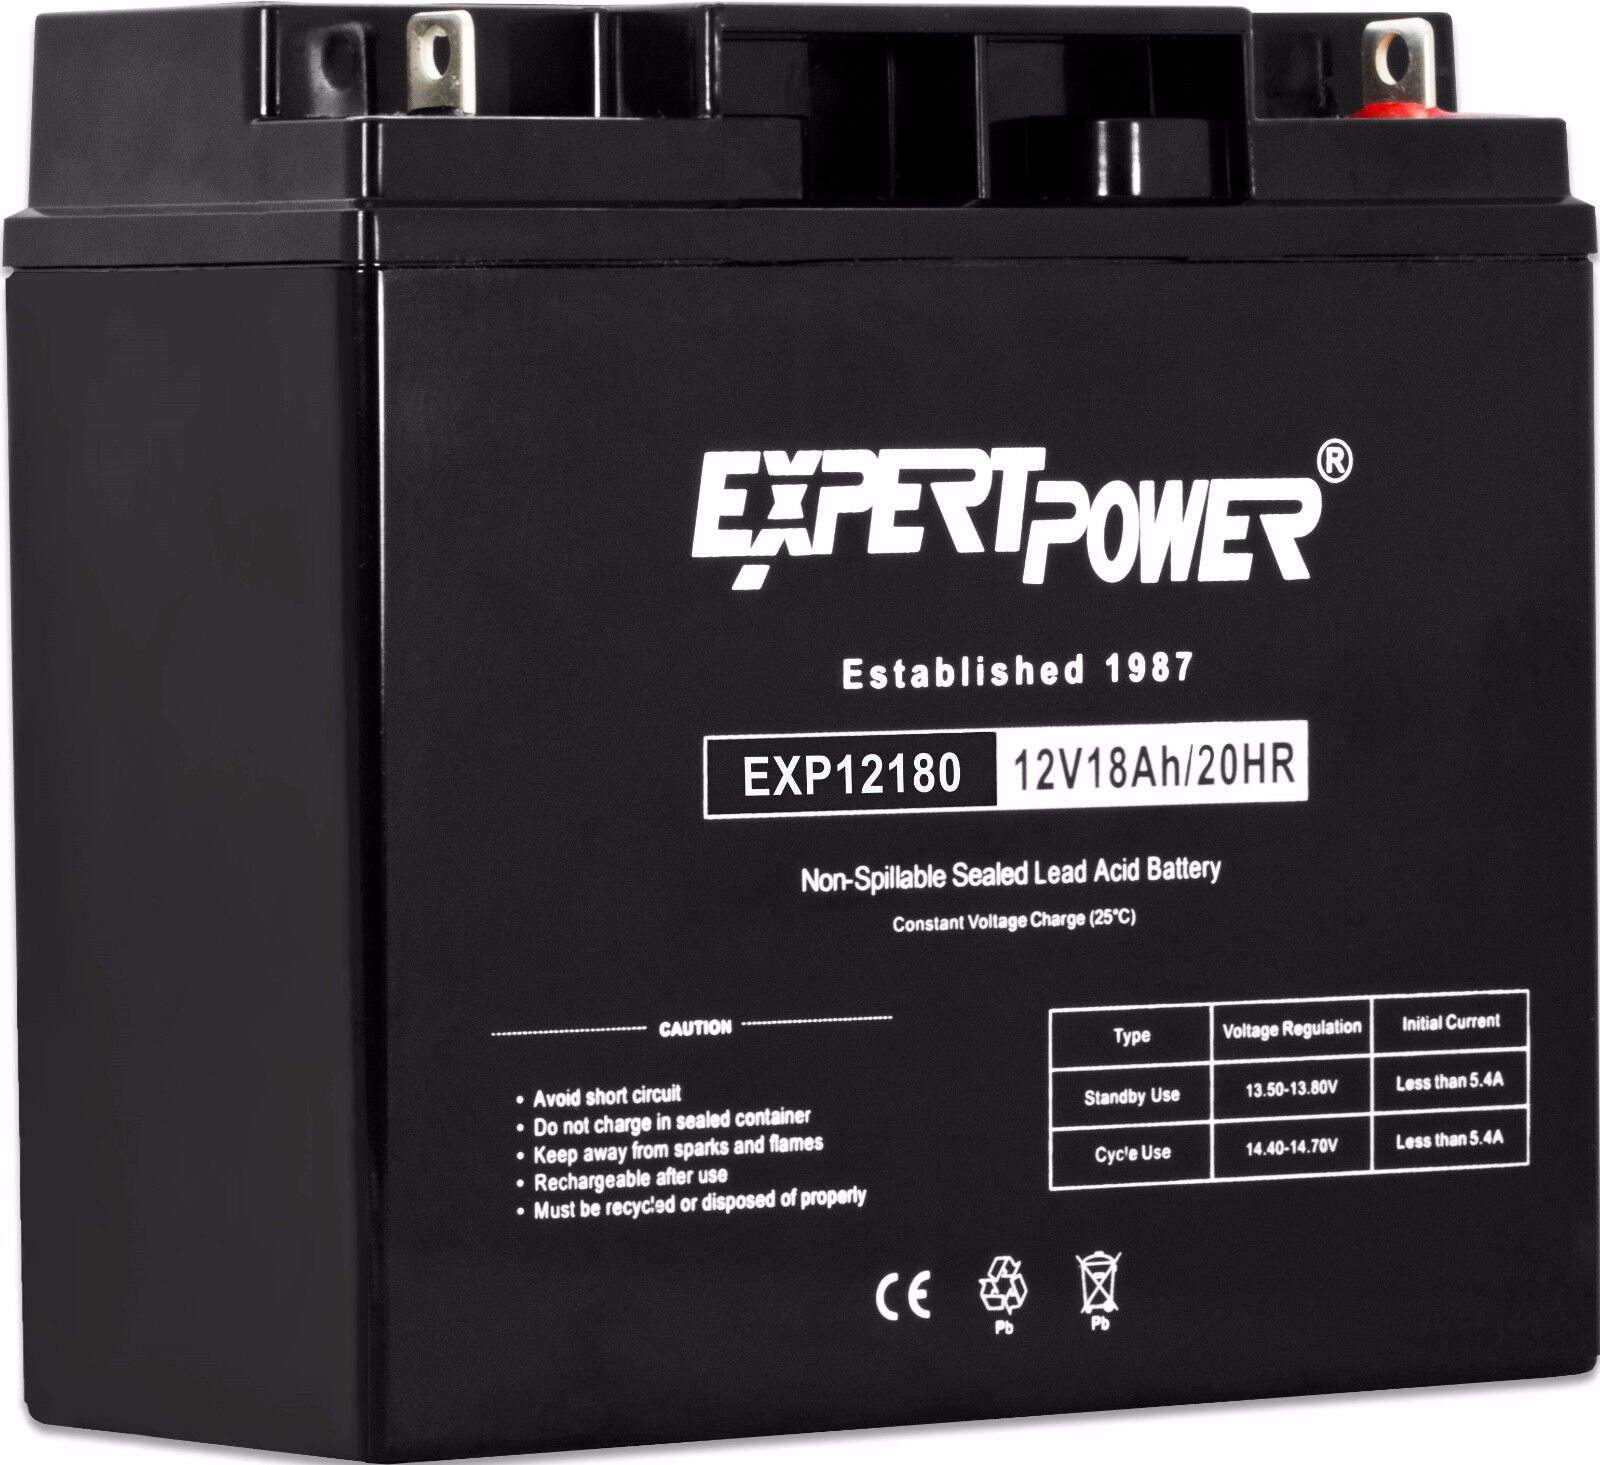 2 PACK Expert Power APC RBC7 Cartridge Battery Replacement for UPS Backup System ExpertPower EXP12180 - фотография #4